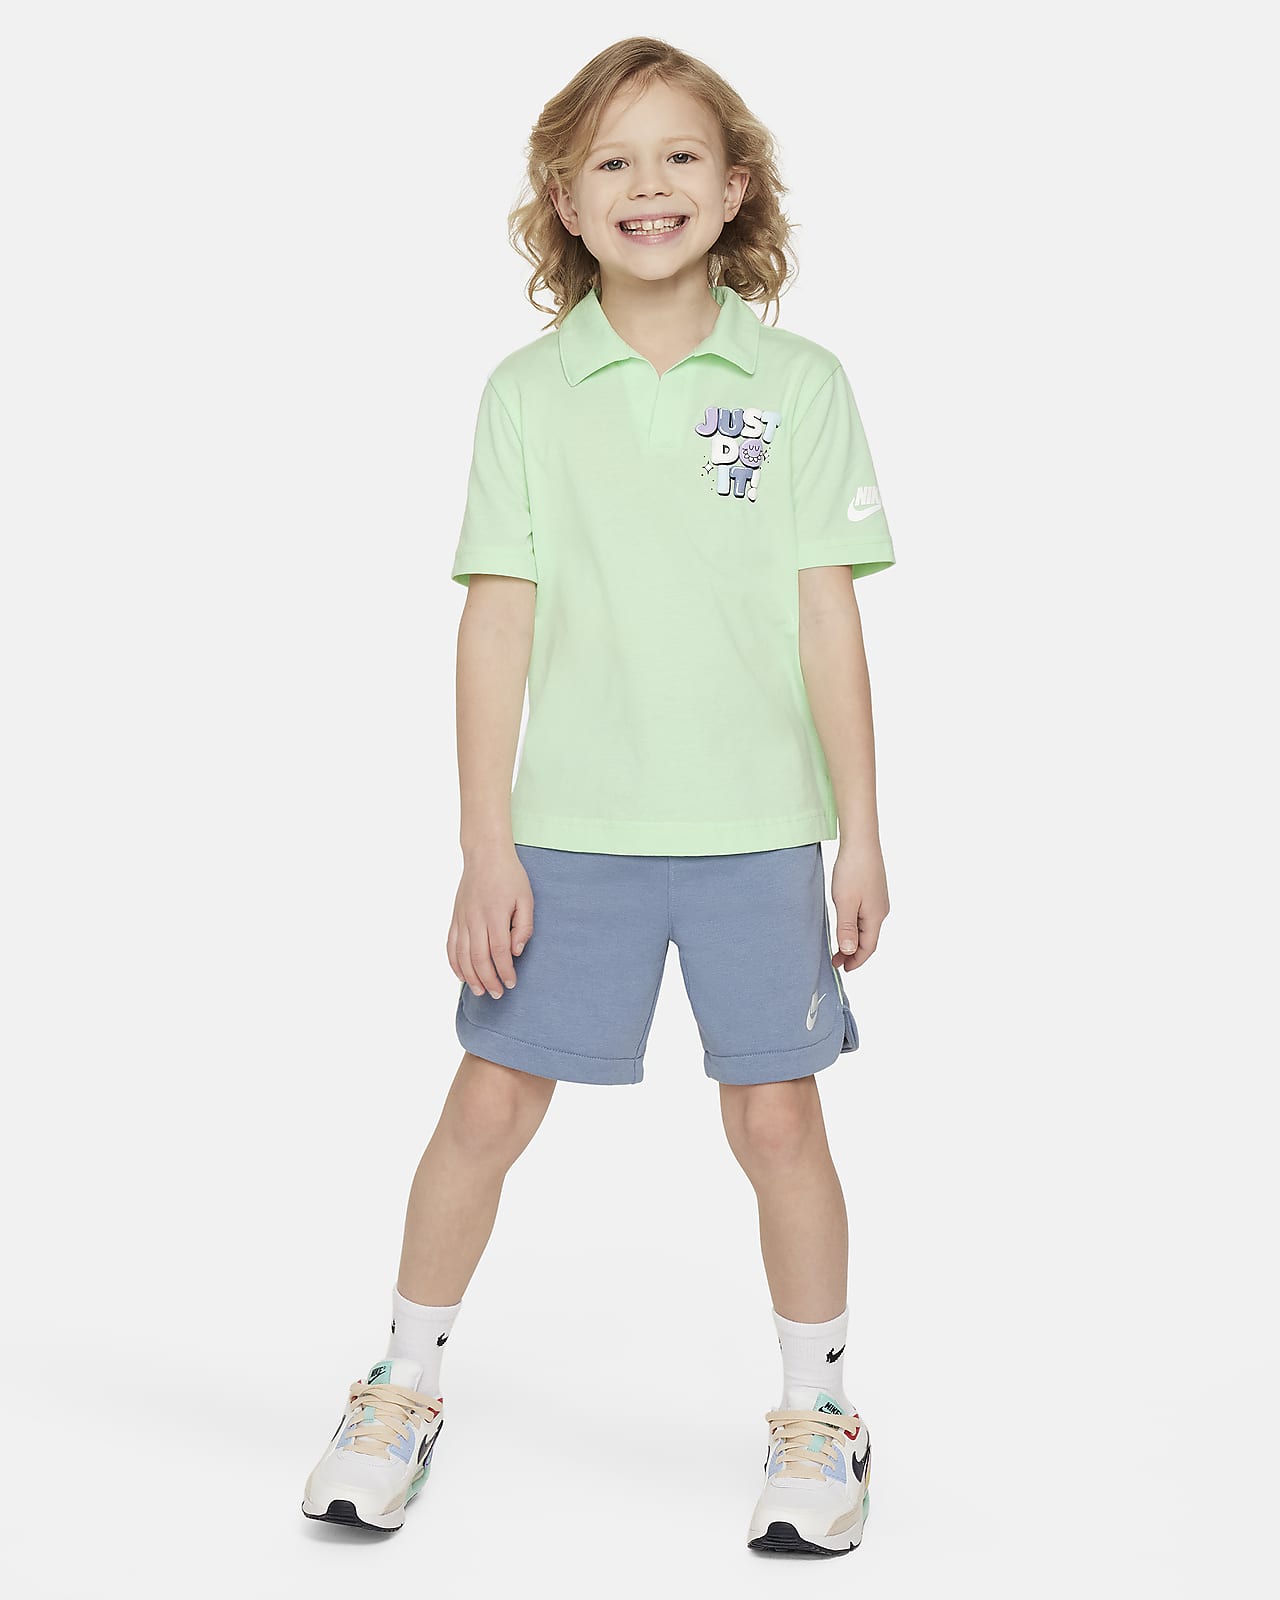 Nike Sportswear Create Your Own Adventure Little Kids' Polo and Shorts Set